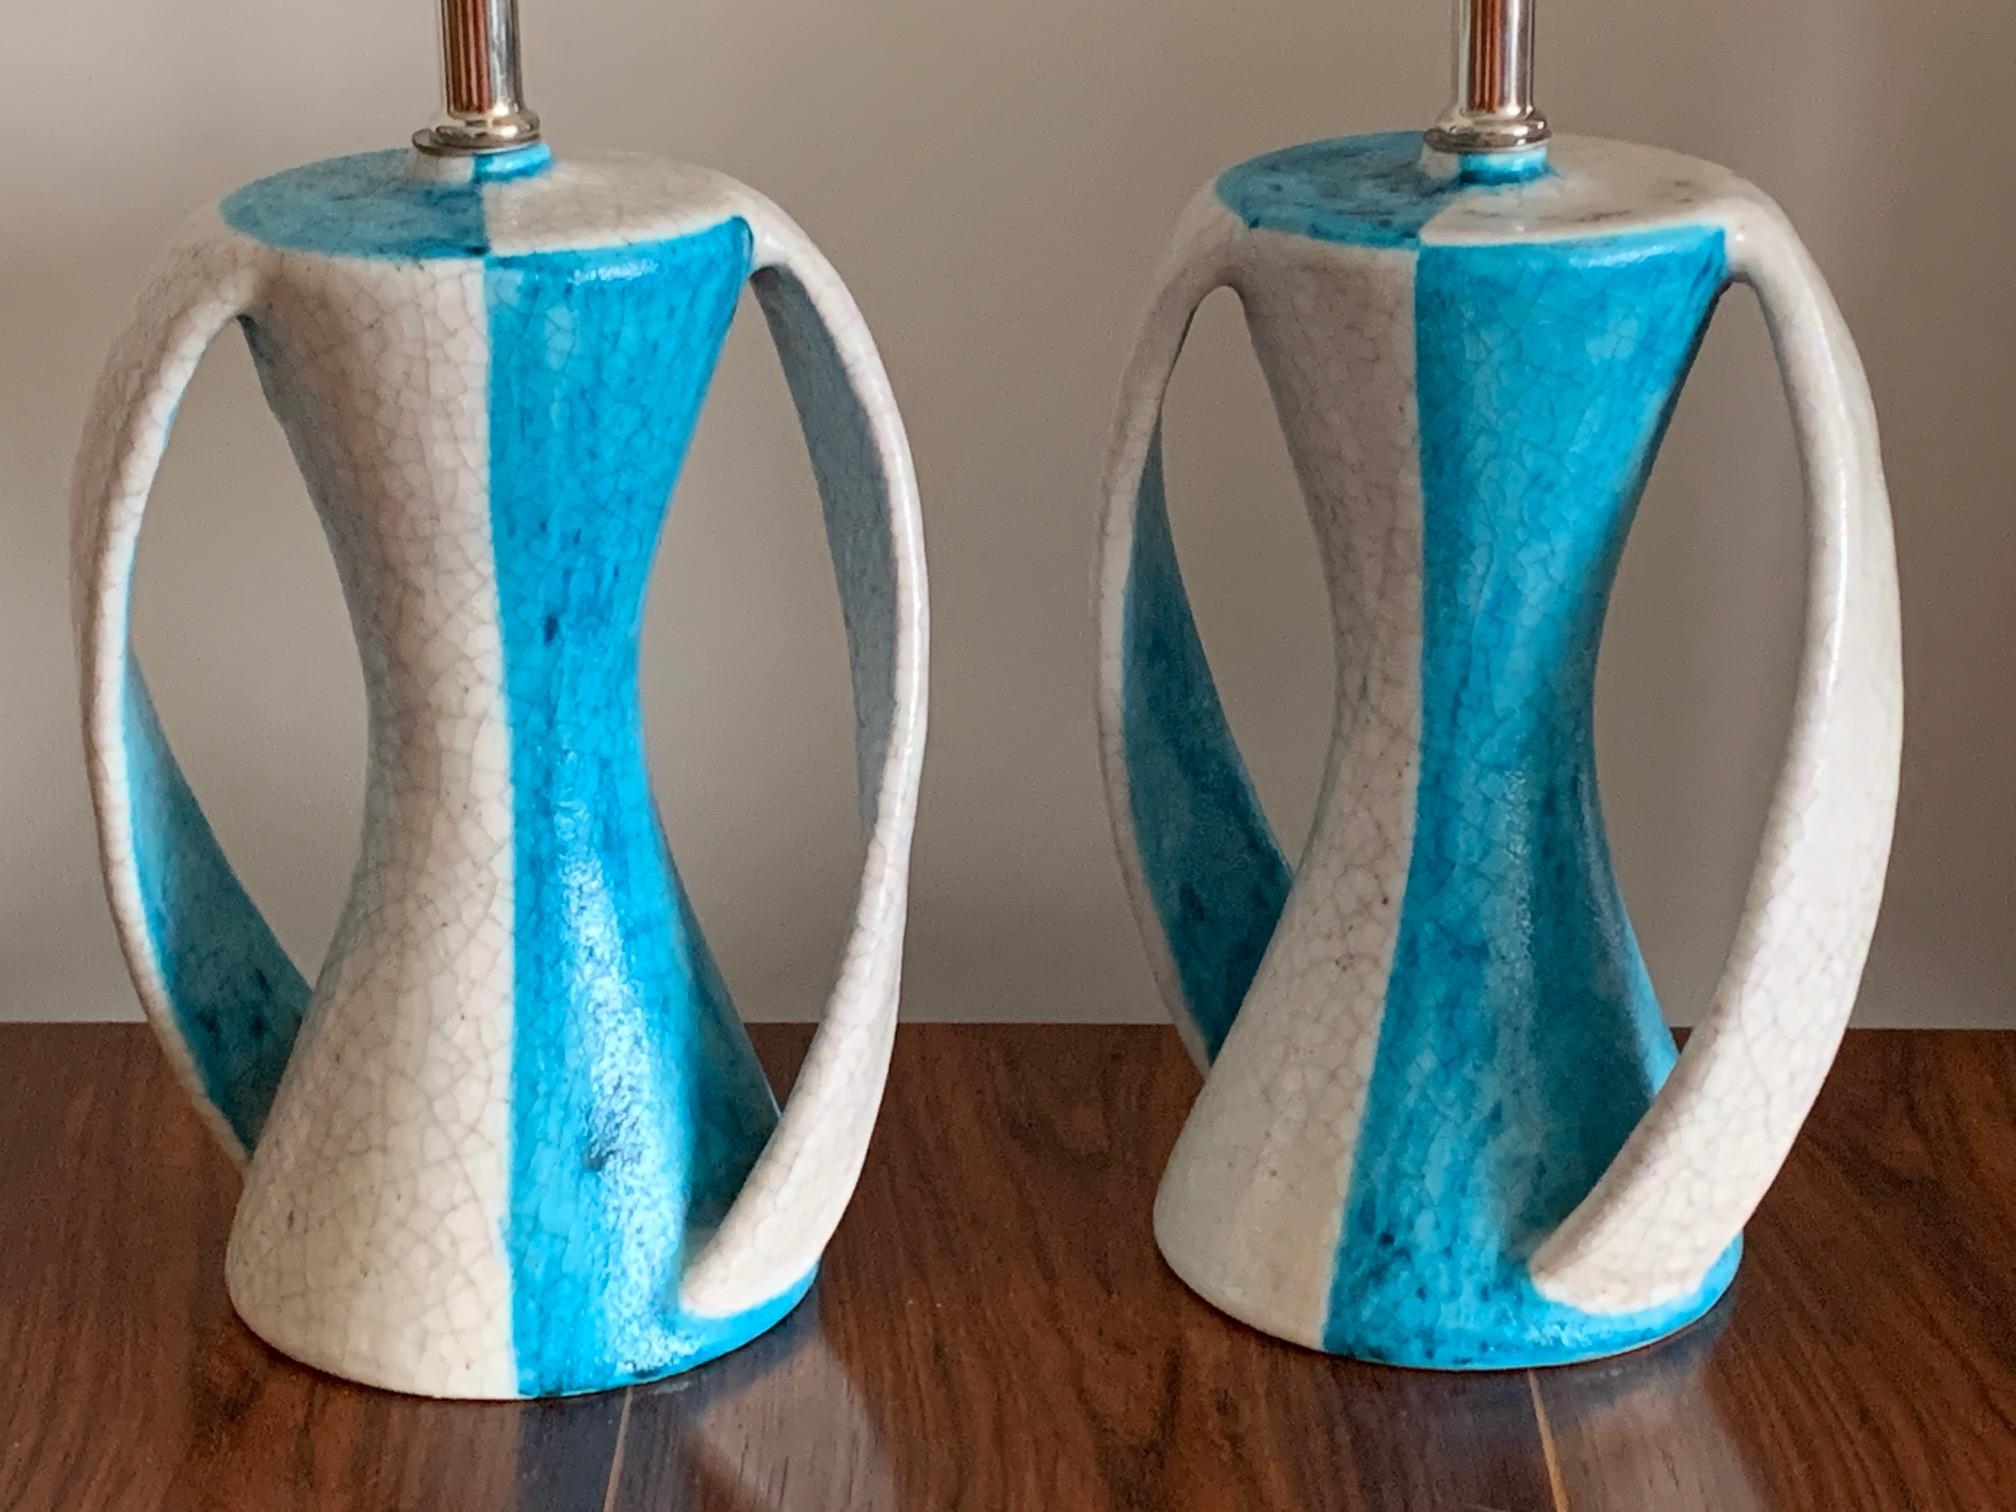 A great pair of ceramic lamps by Guido Gambone (1909-1969), one of Italy's most influential 20th Century potters. Signed with a Donkey mark. Ceramic bases alone measure approx. 9